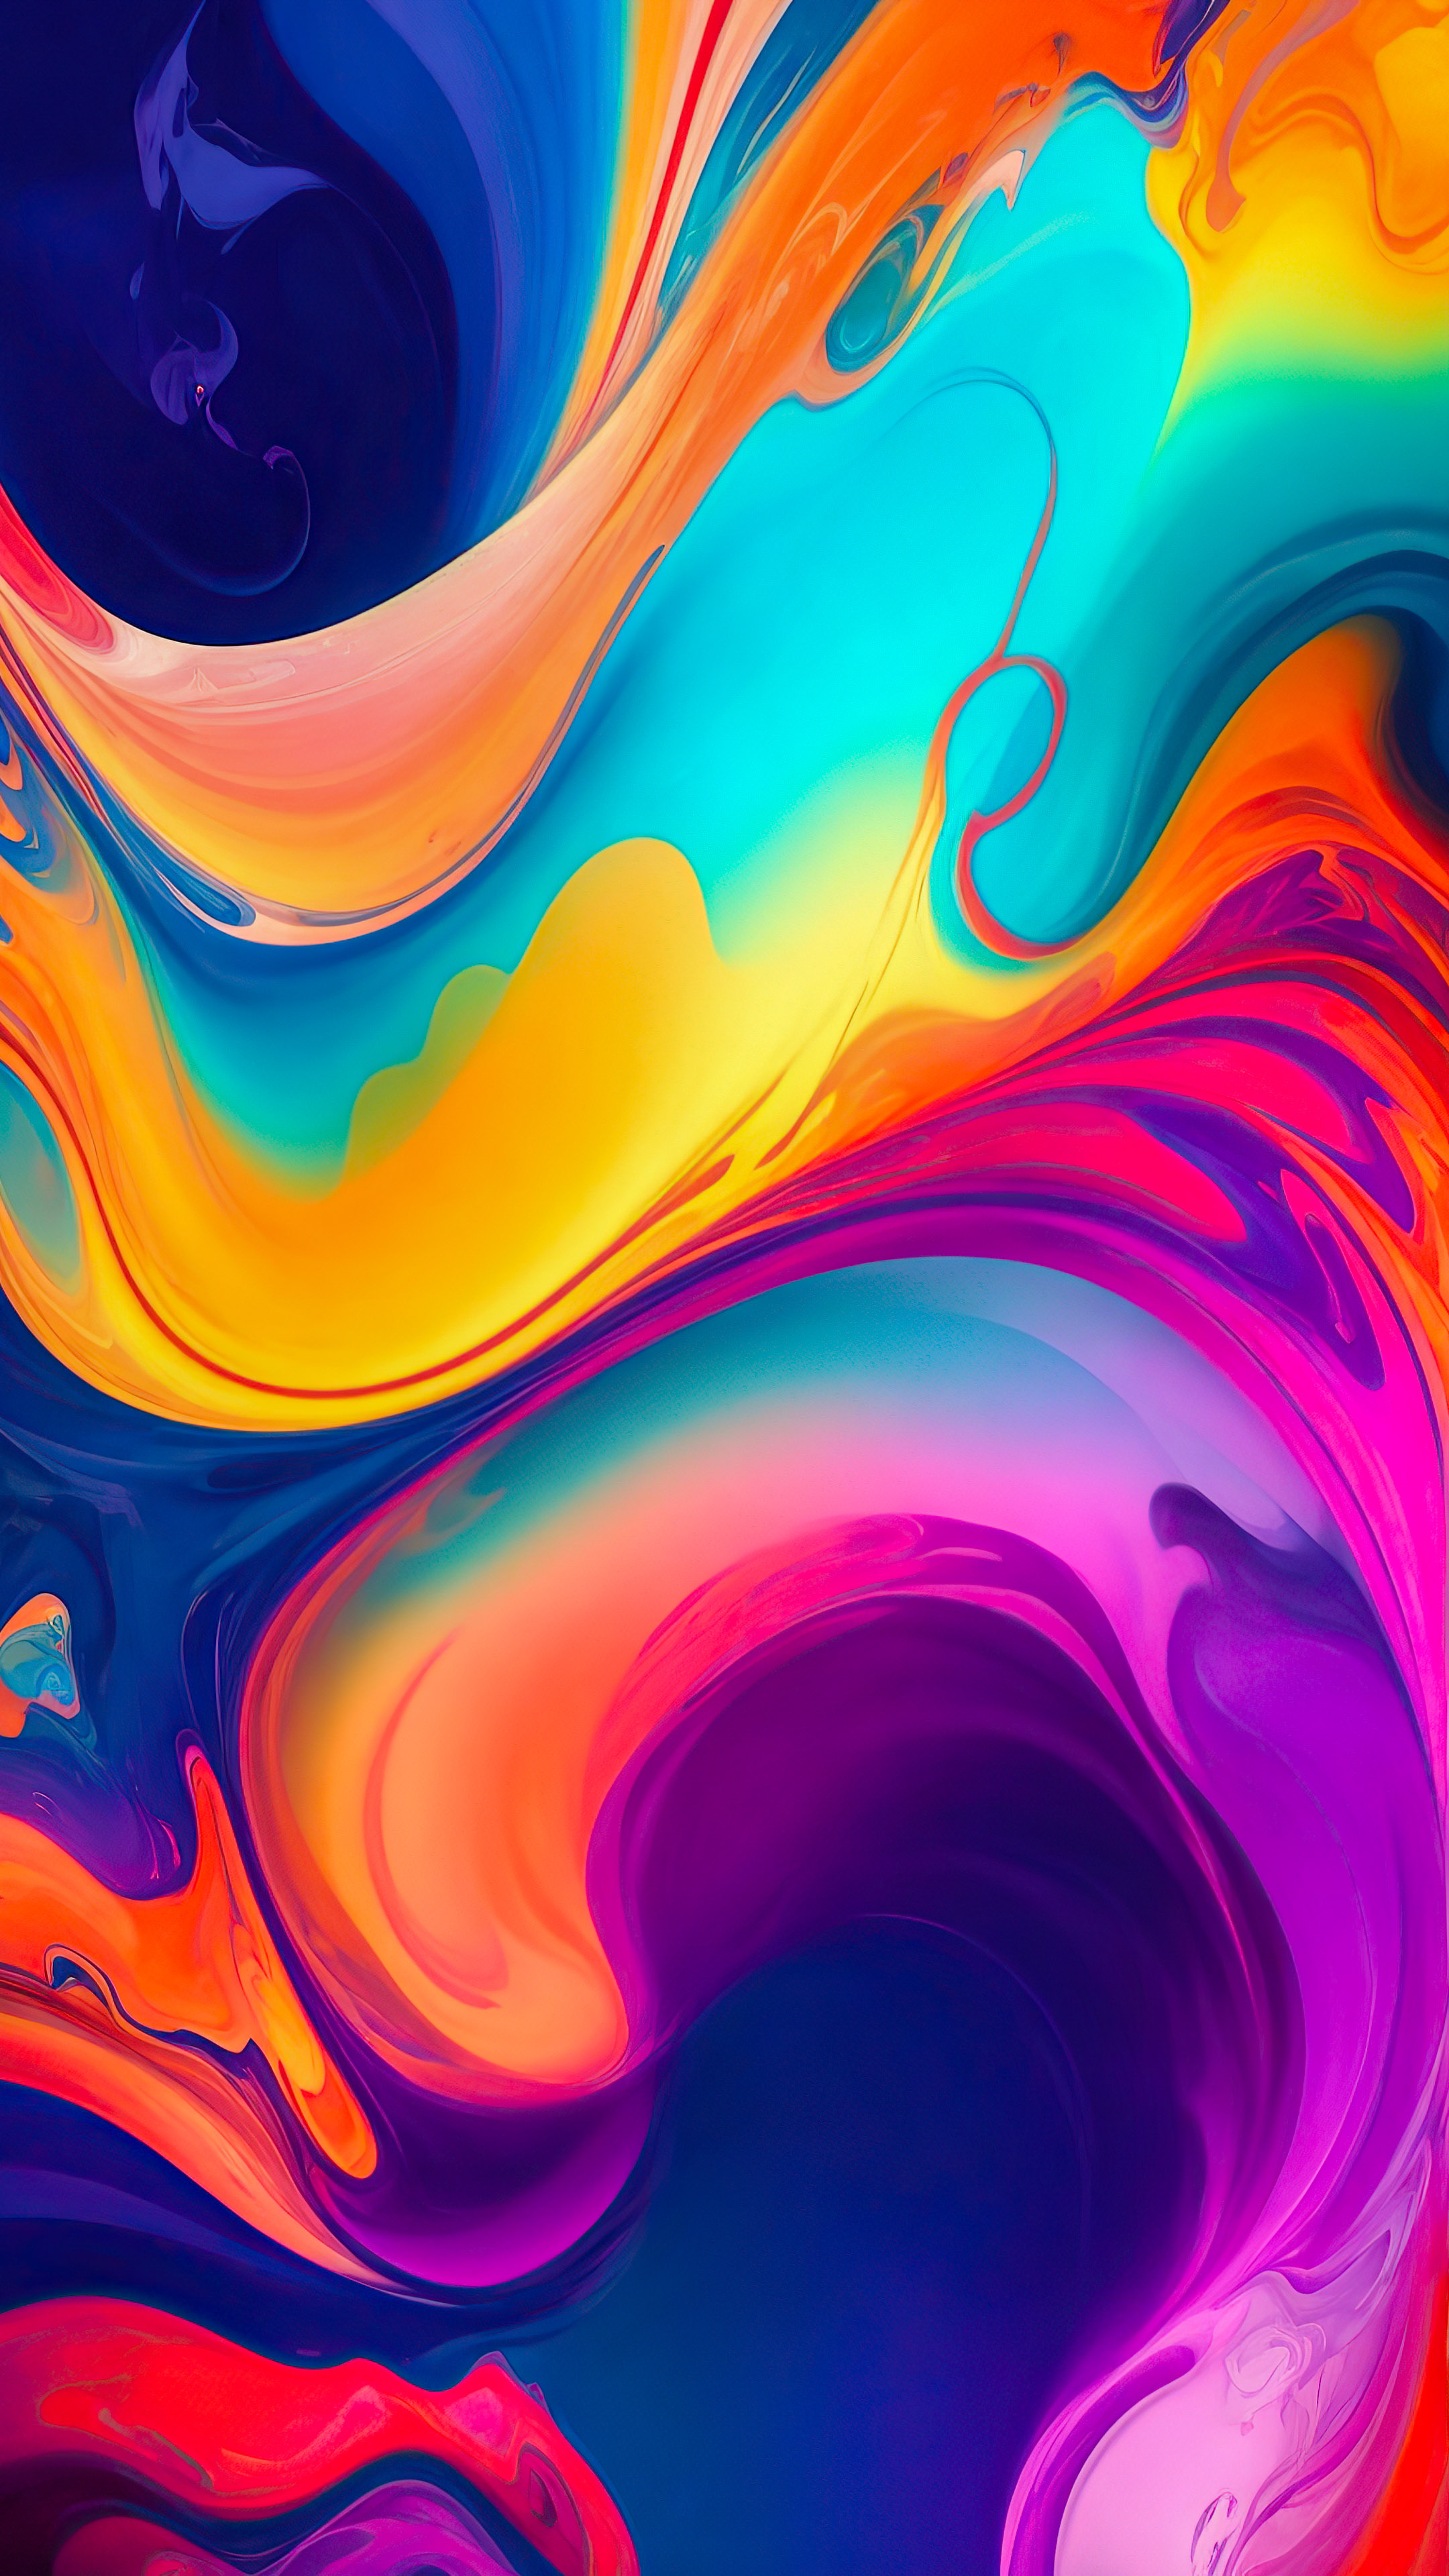 Elevate your phone aesthetics with our phone abstract wallpaper 4k, featuring complex and colorful work that evokes a mesmerizing sense of chaos and spiritualism.